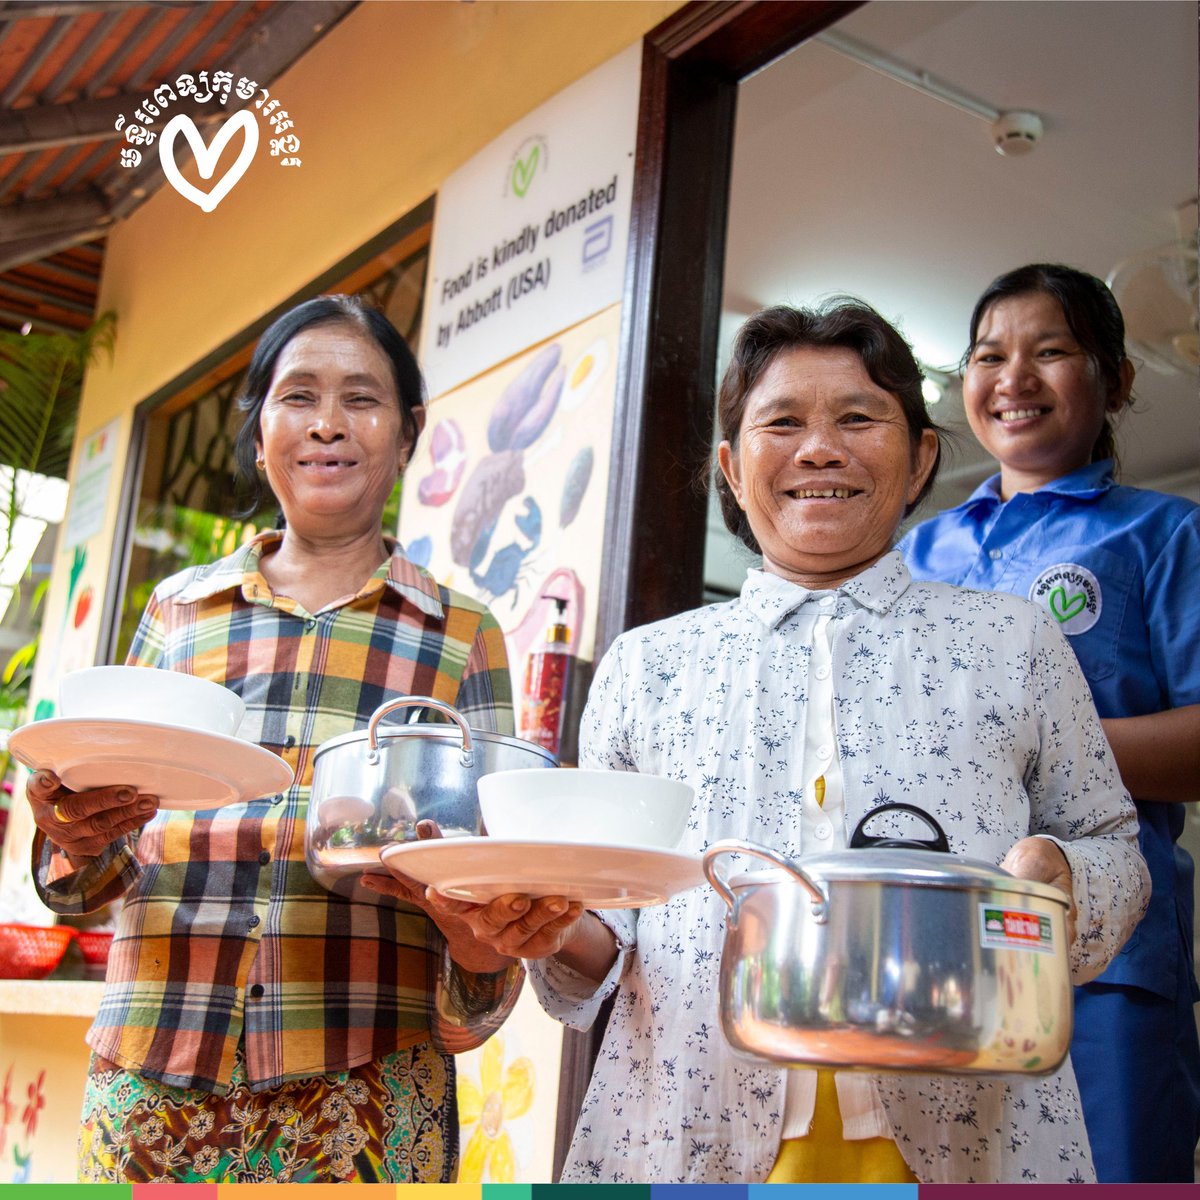 In August, in addition to their generous funding, we received a new laptop and a kitchen makeover from @Herbalife Herbalife Nutrition Foundation has supported our nutrition programme for the past five years. Thank you for your continued support!